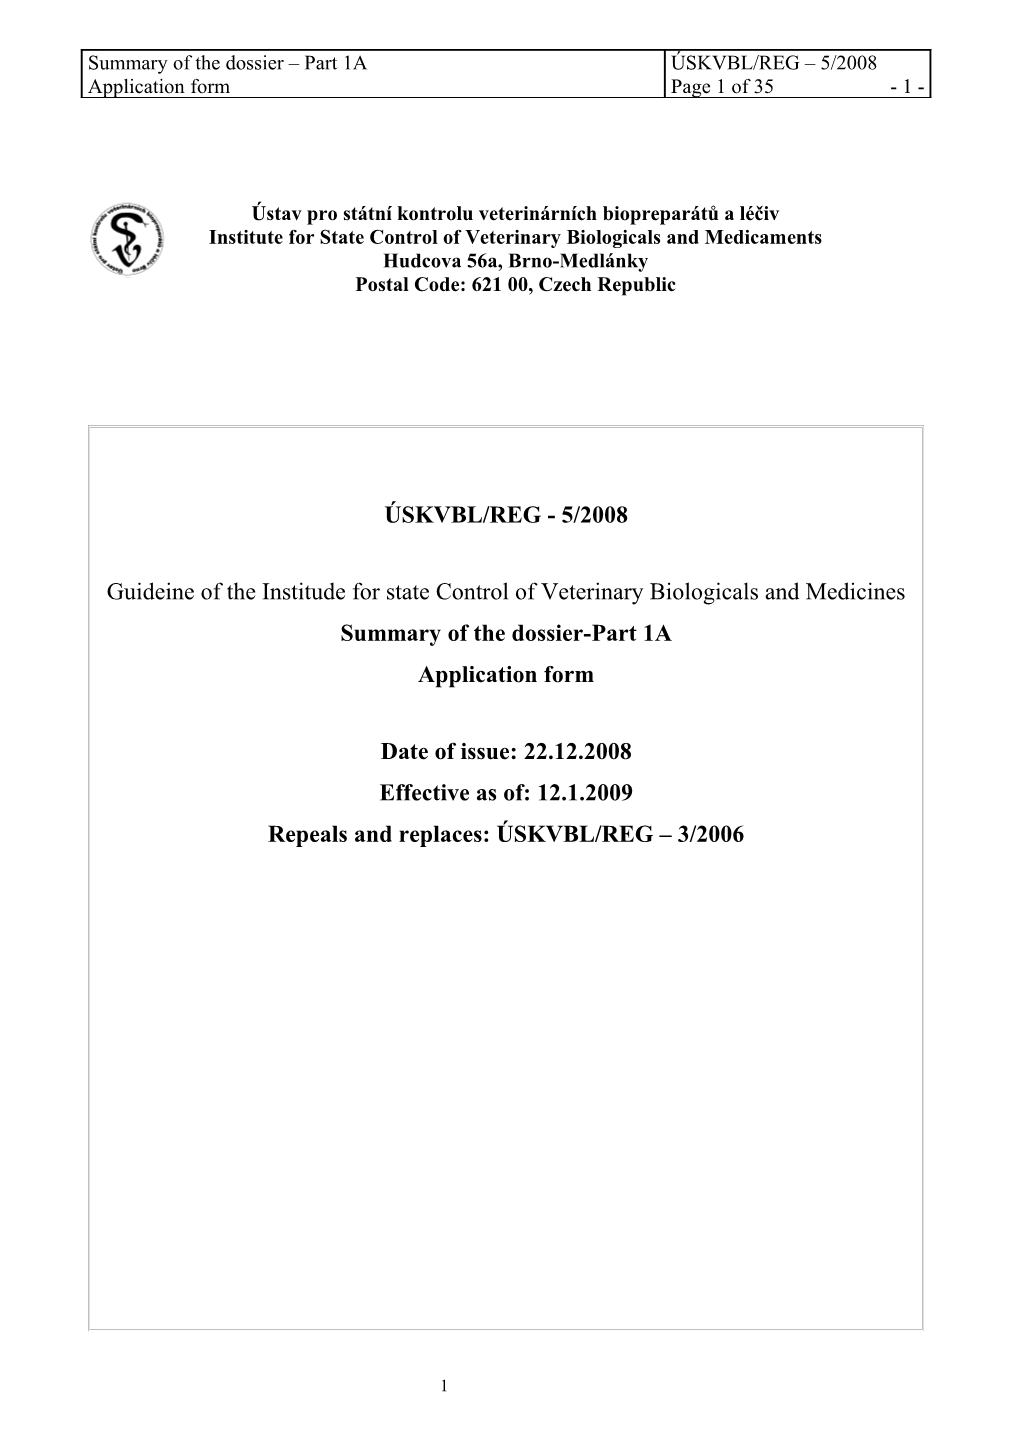 Guideine of the Institude for State Control of Veterinary Biologicals and Medicines